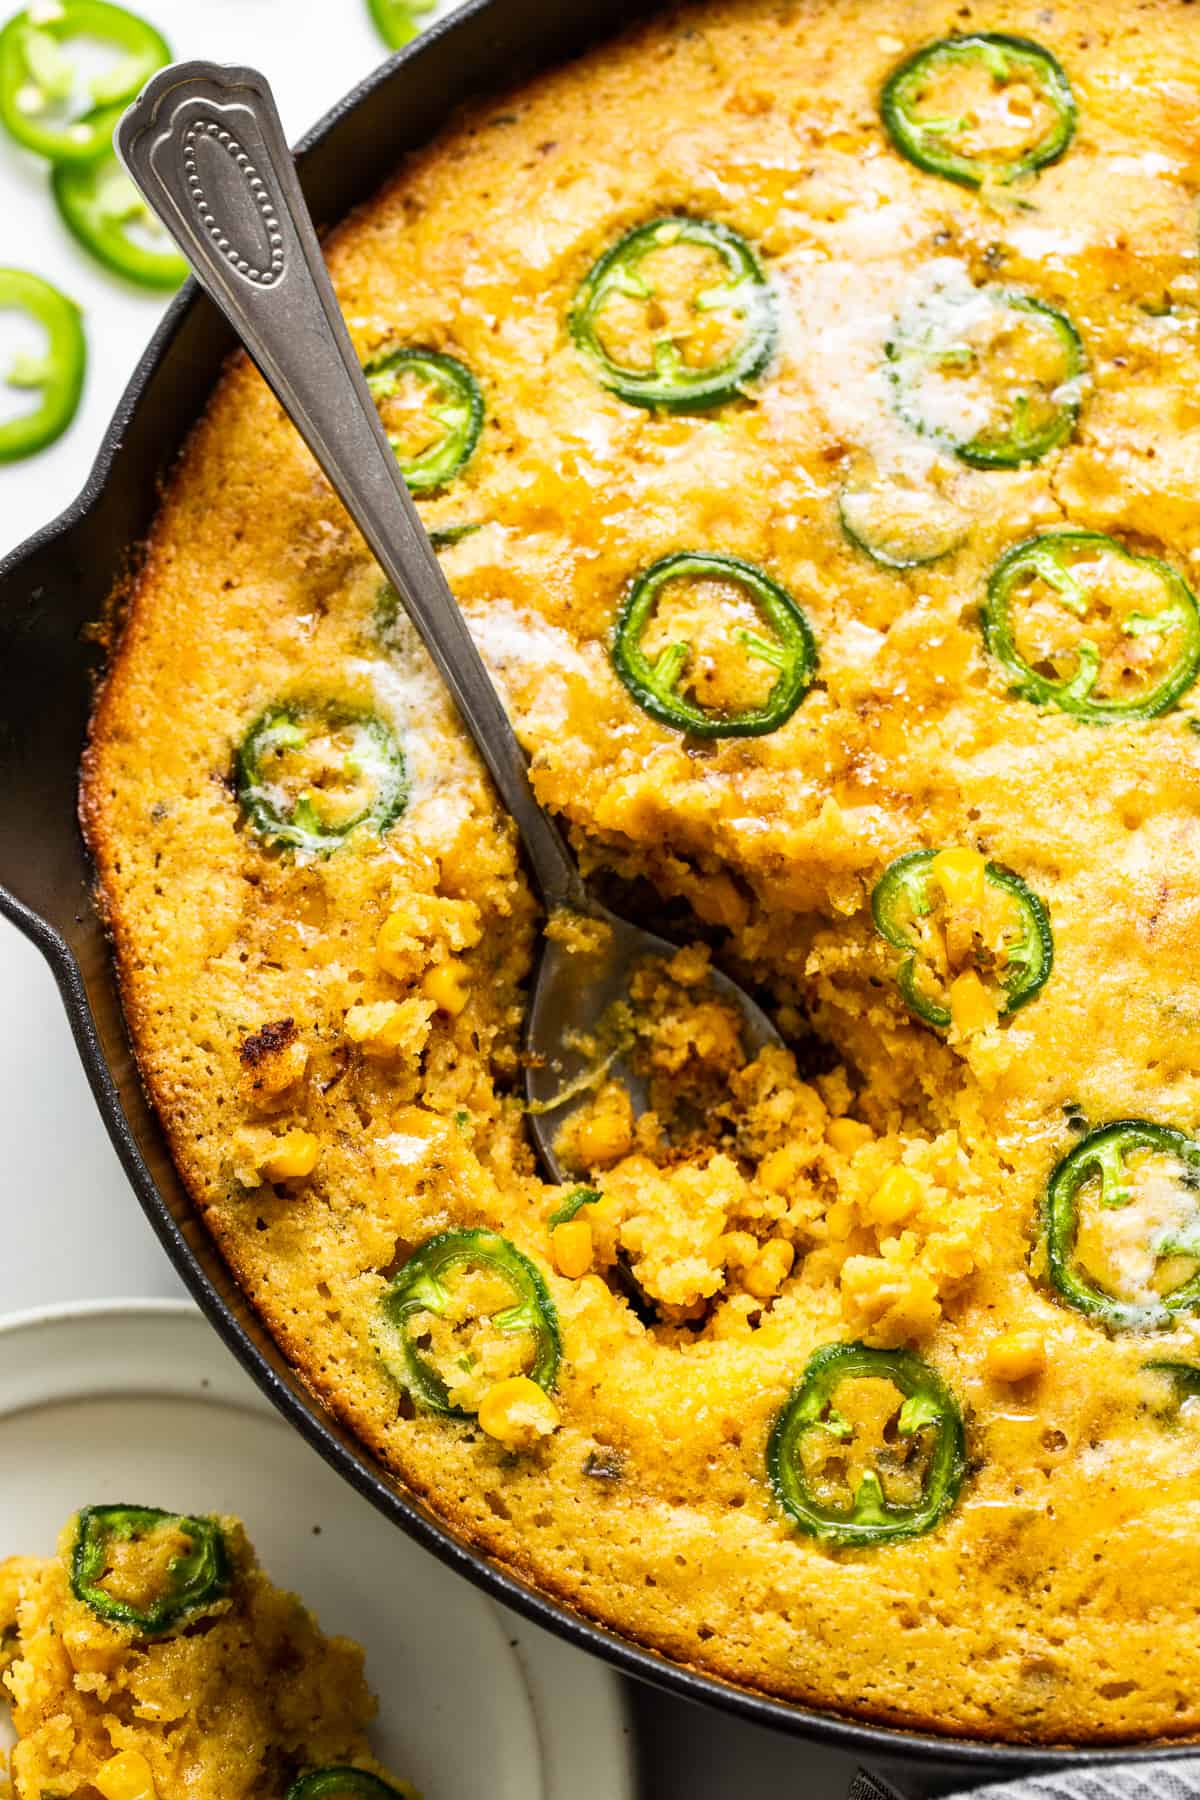 A spoon scooped into a skillet or jalapeno corn pudding.